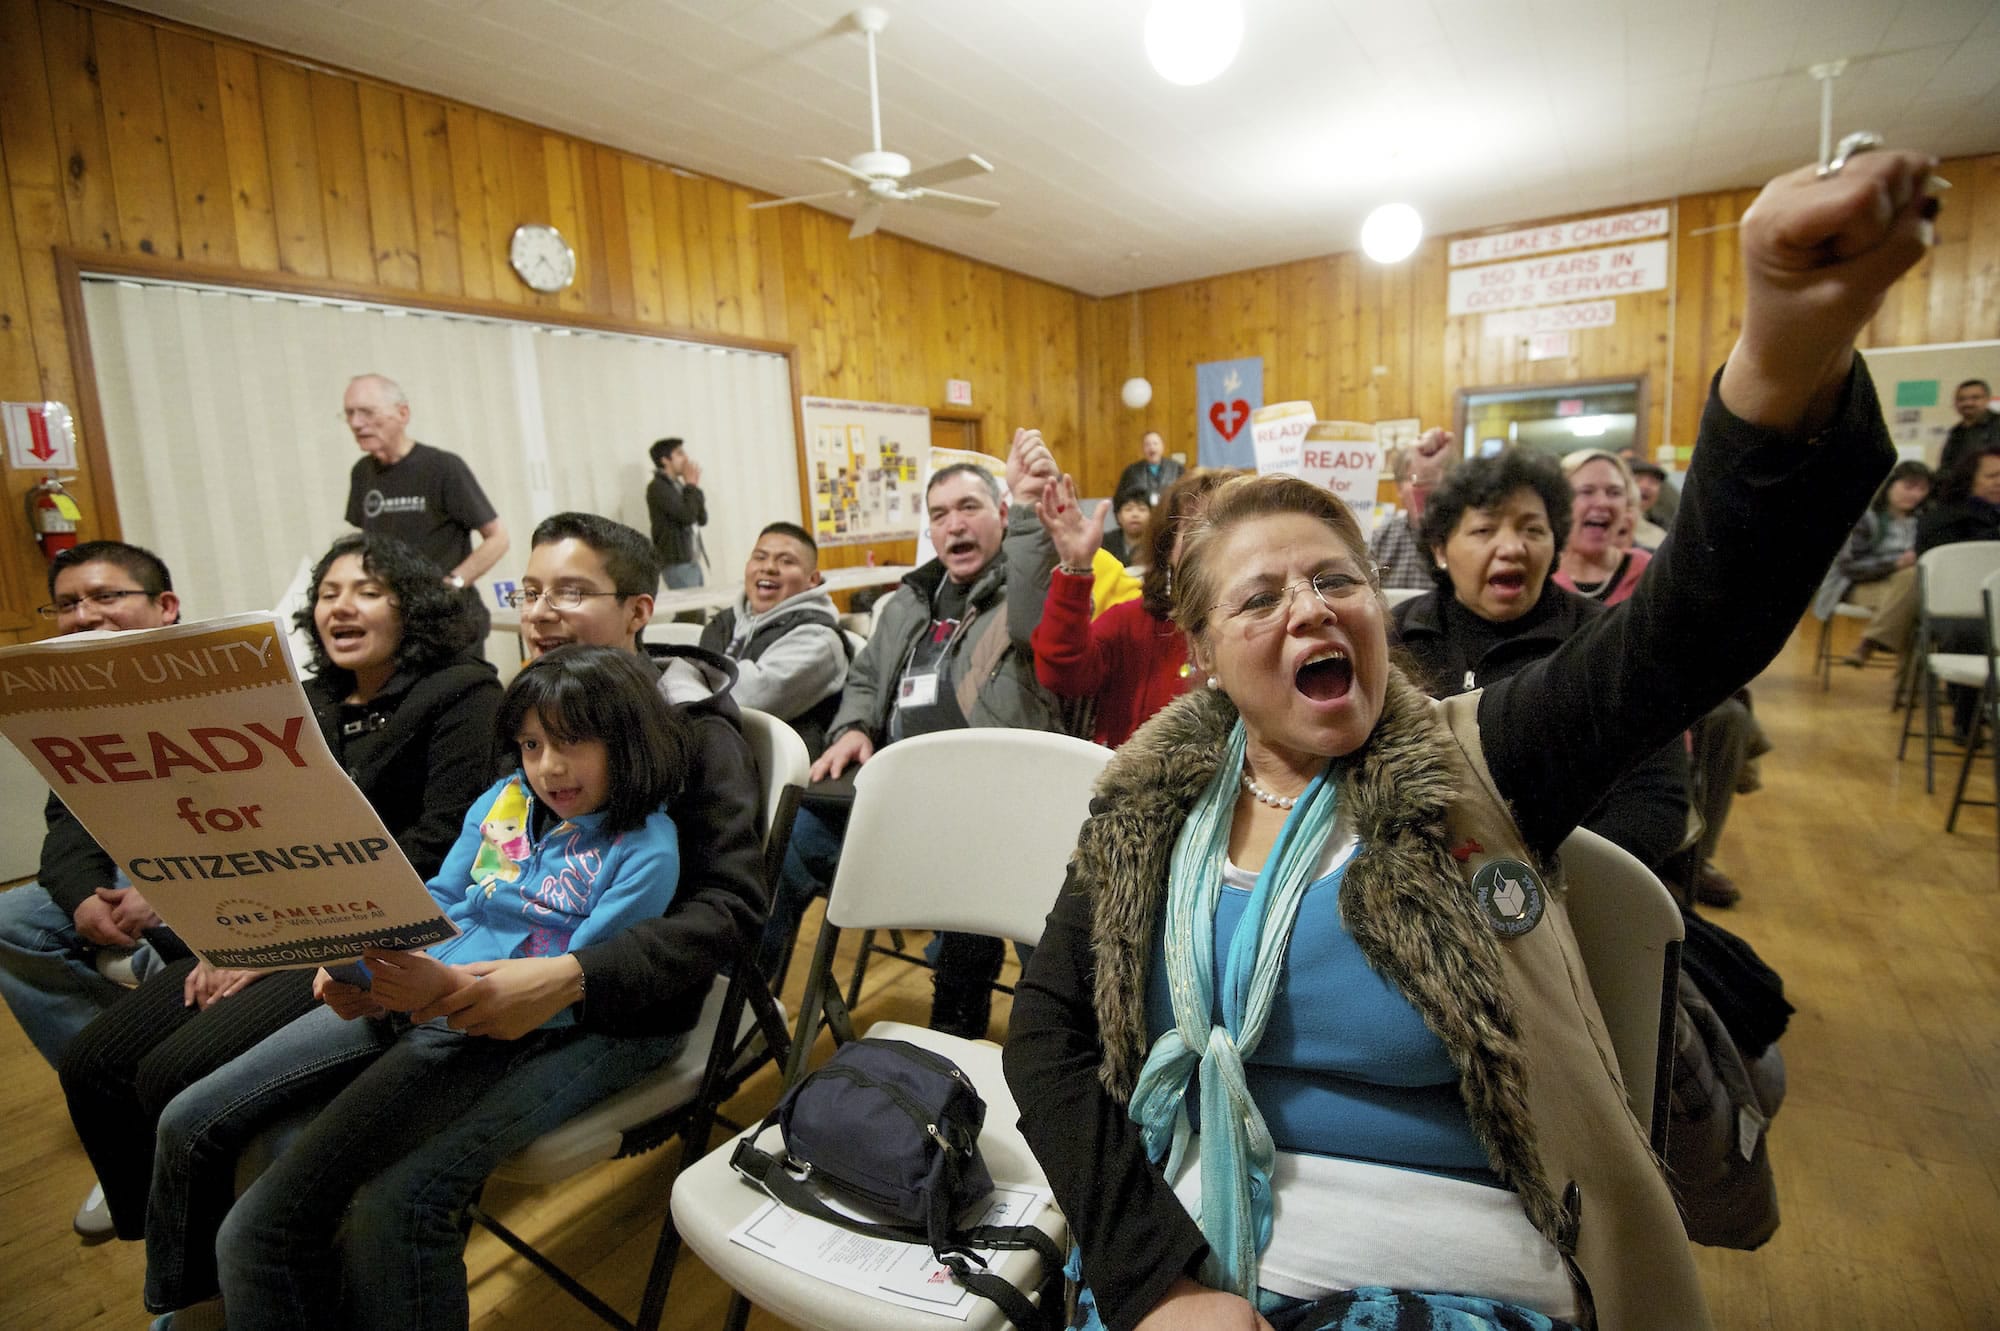 Lupe Sanchez of Yakima, right, shouts for immigration reform at a rally Tuesday at St. Luke's Episcopal Church in Vancouver. The rally began a statewide bus tour advocating for comprehensive immigration reform.